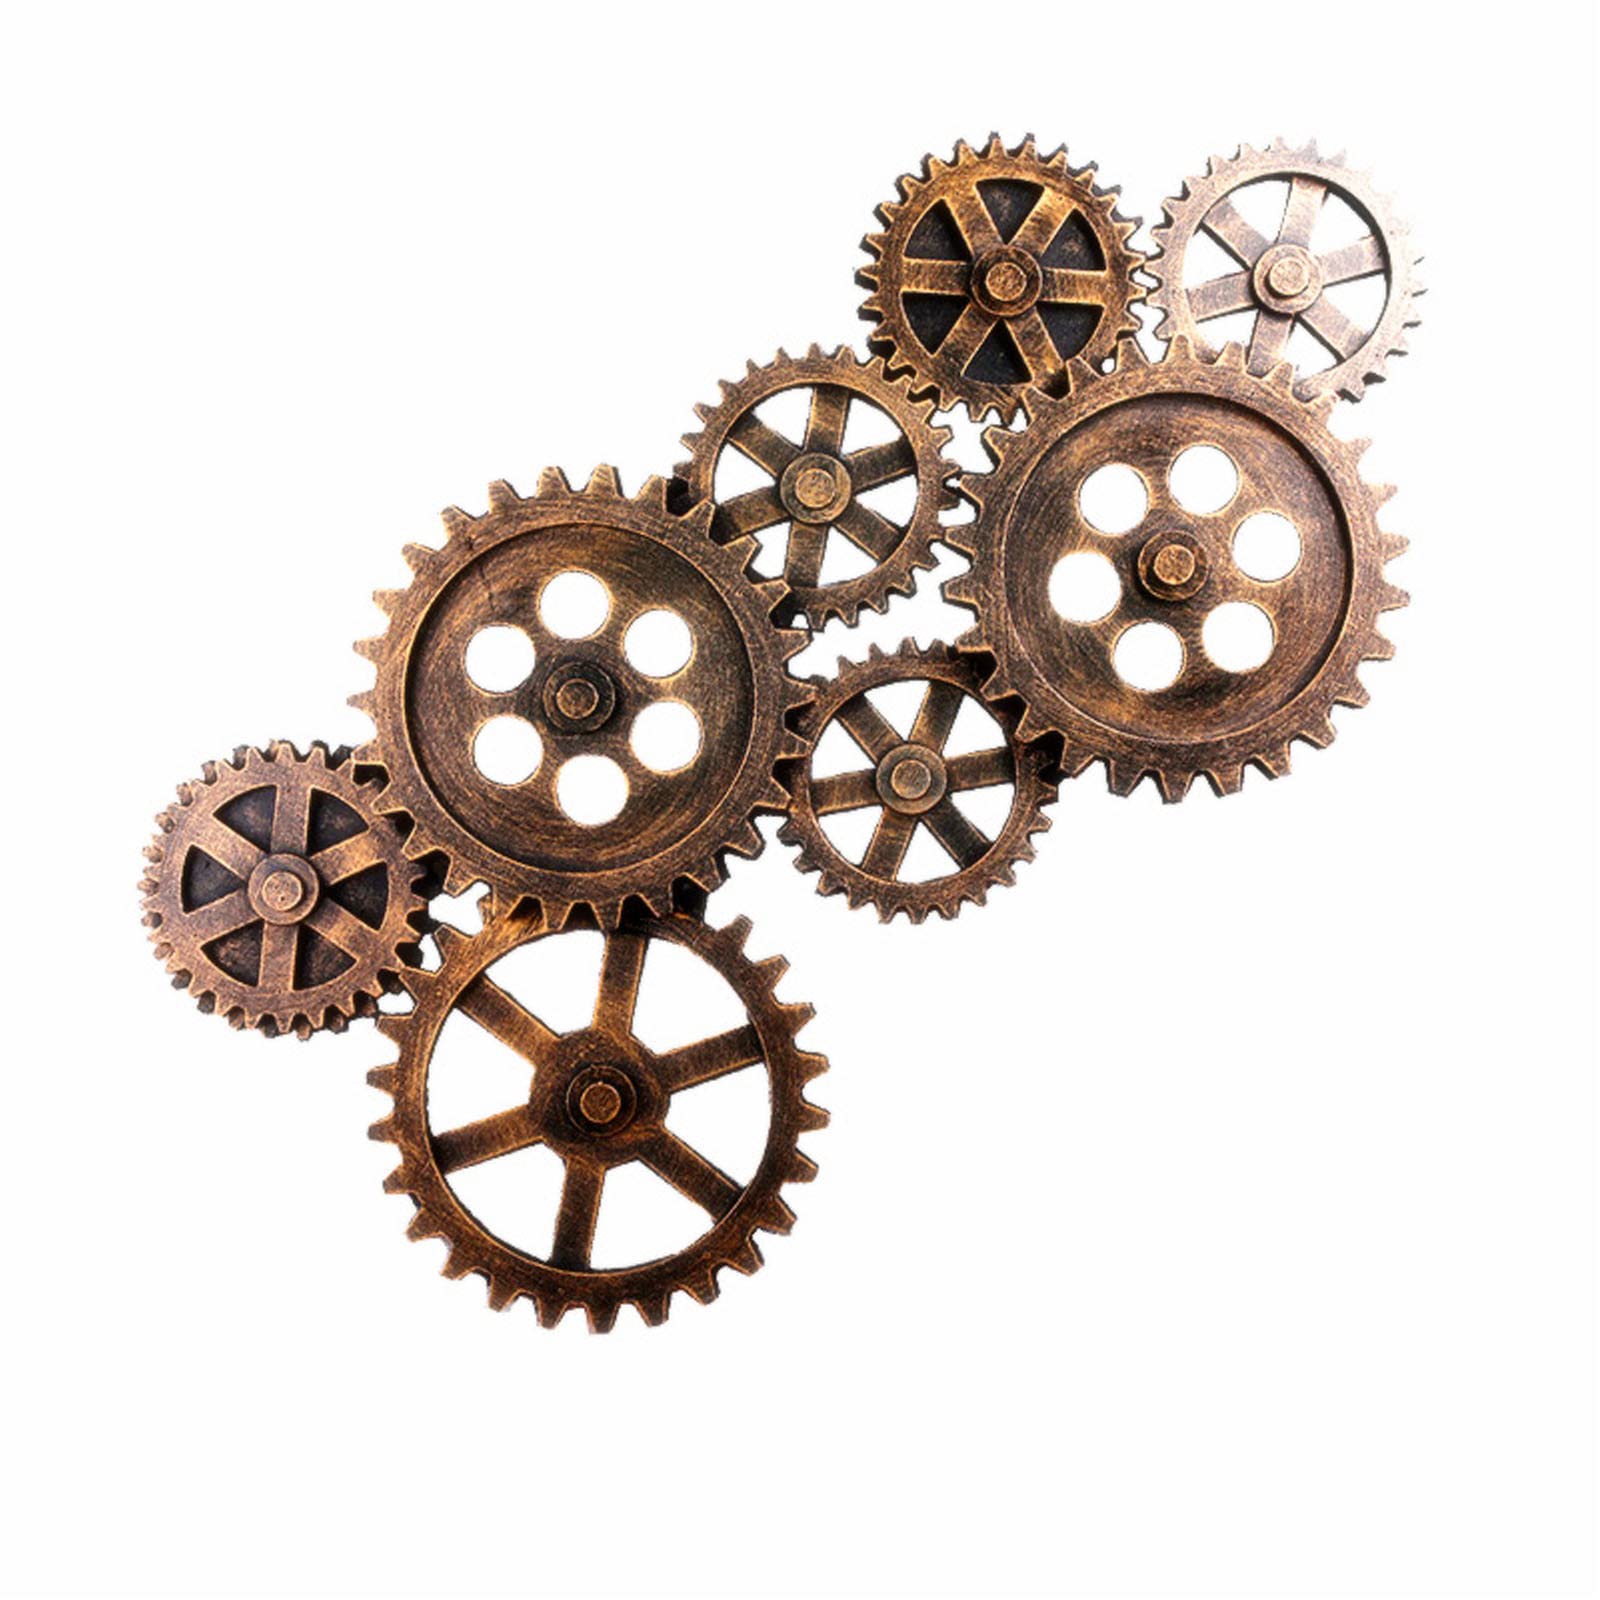 Novelty Items European Style Wooden Gear Wall Art Industrial Antique  Vintage Chic Home Bar Gears Decoration Wood Ornaments Wall Hanging Decor  From Liangxin001, $11.72 | DHgate.Com